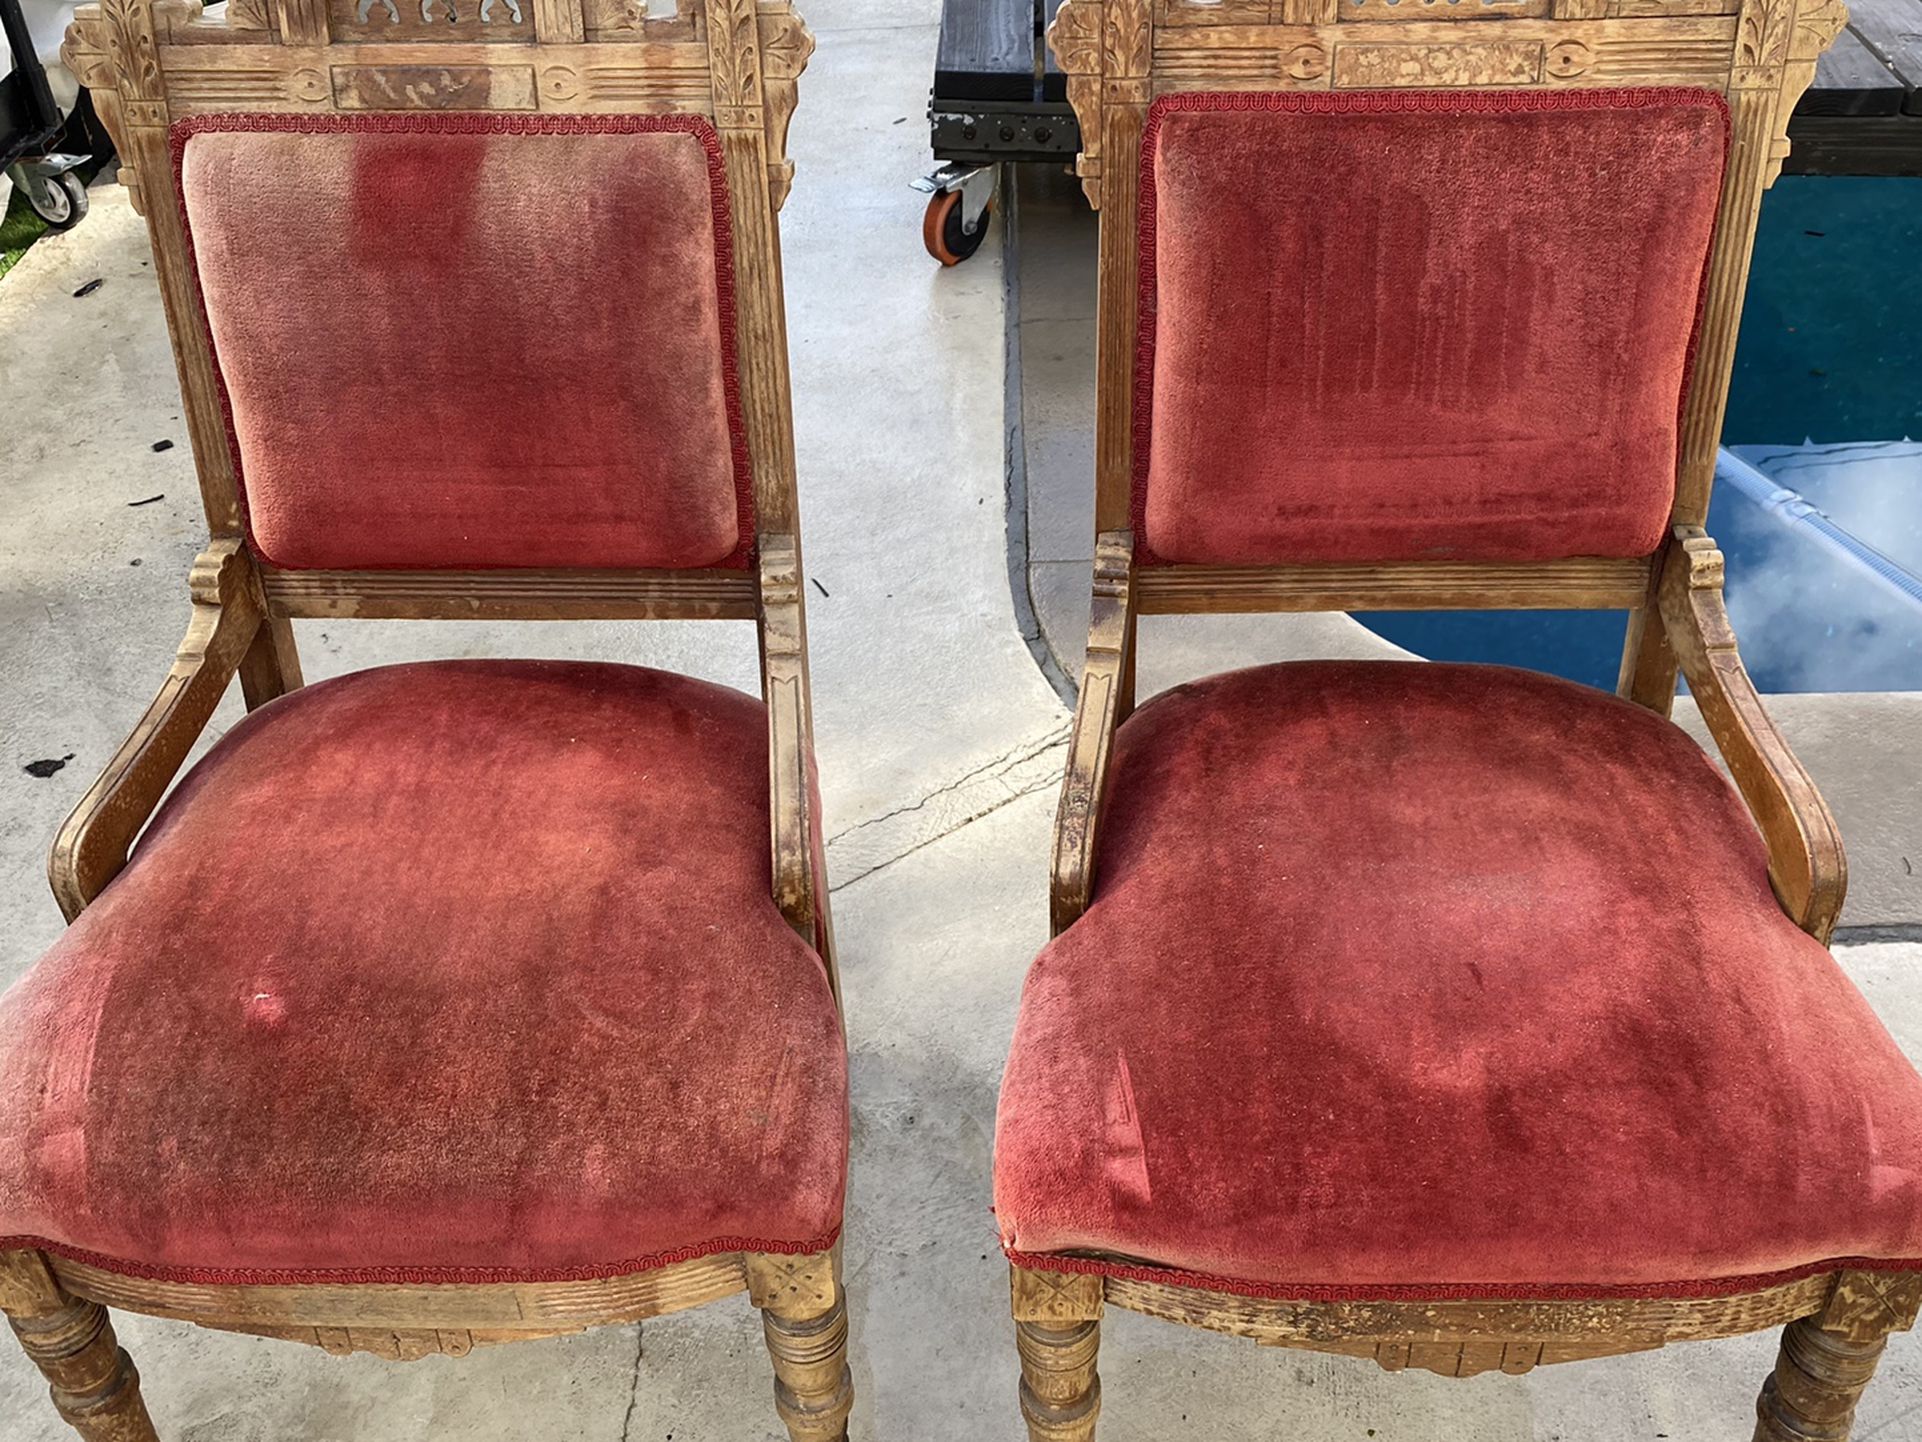 Antique Royalty Chairs - Pair